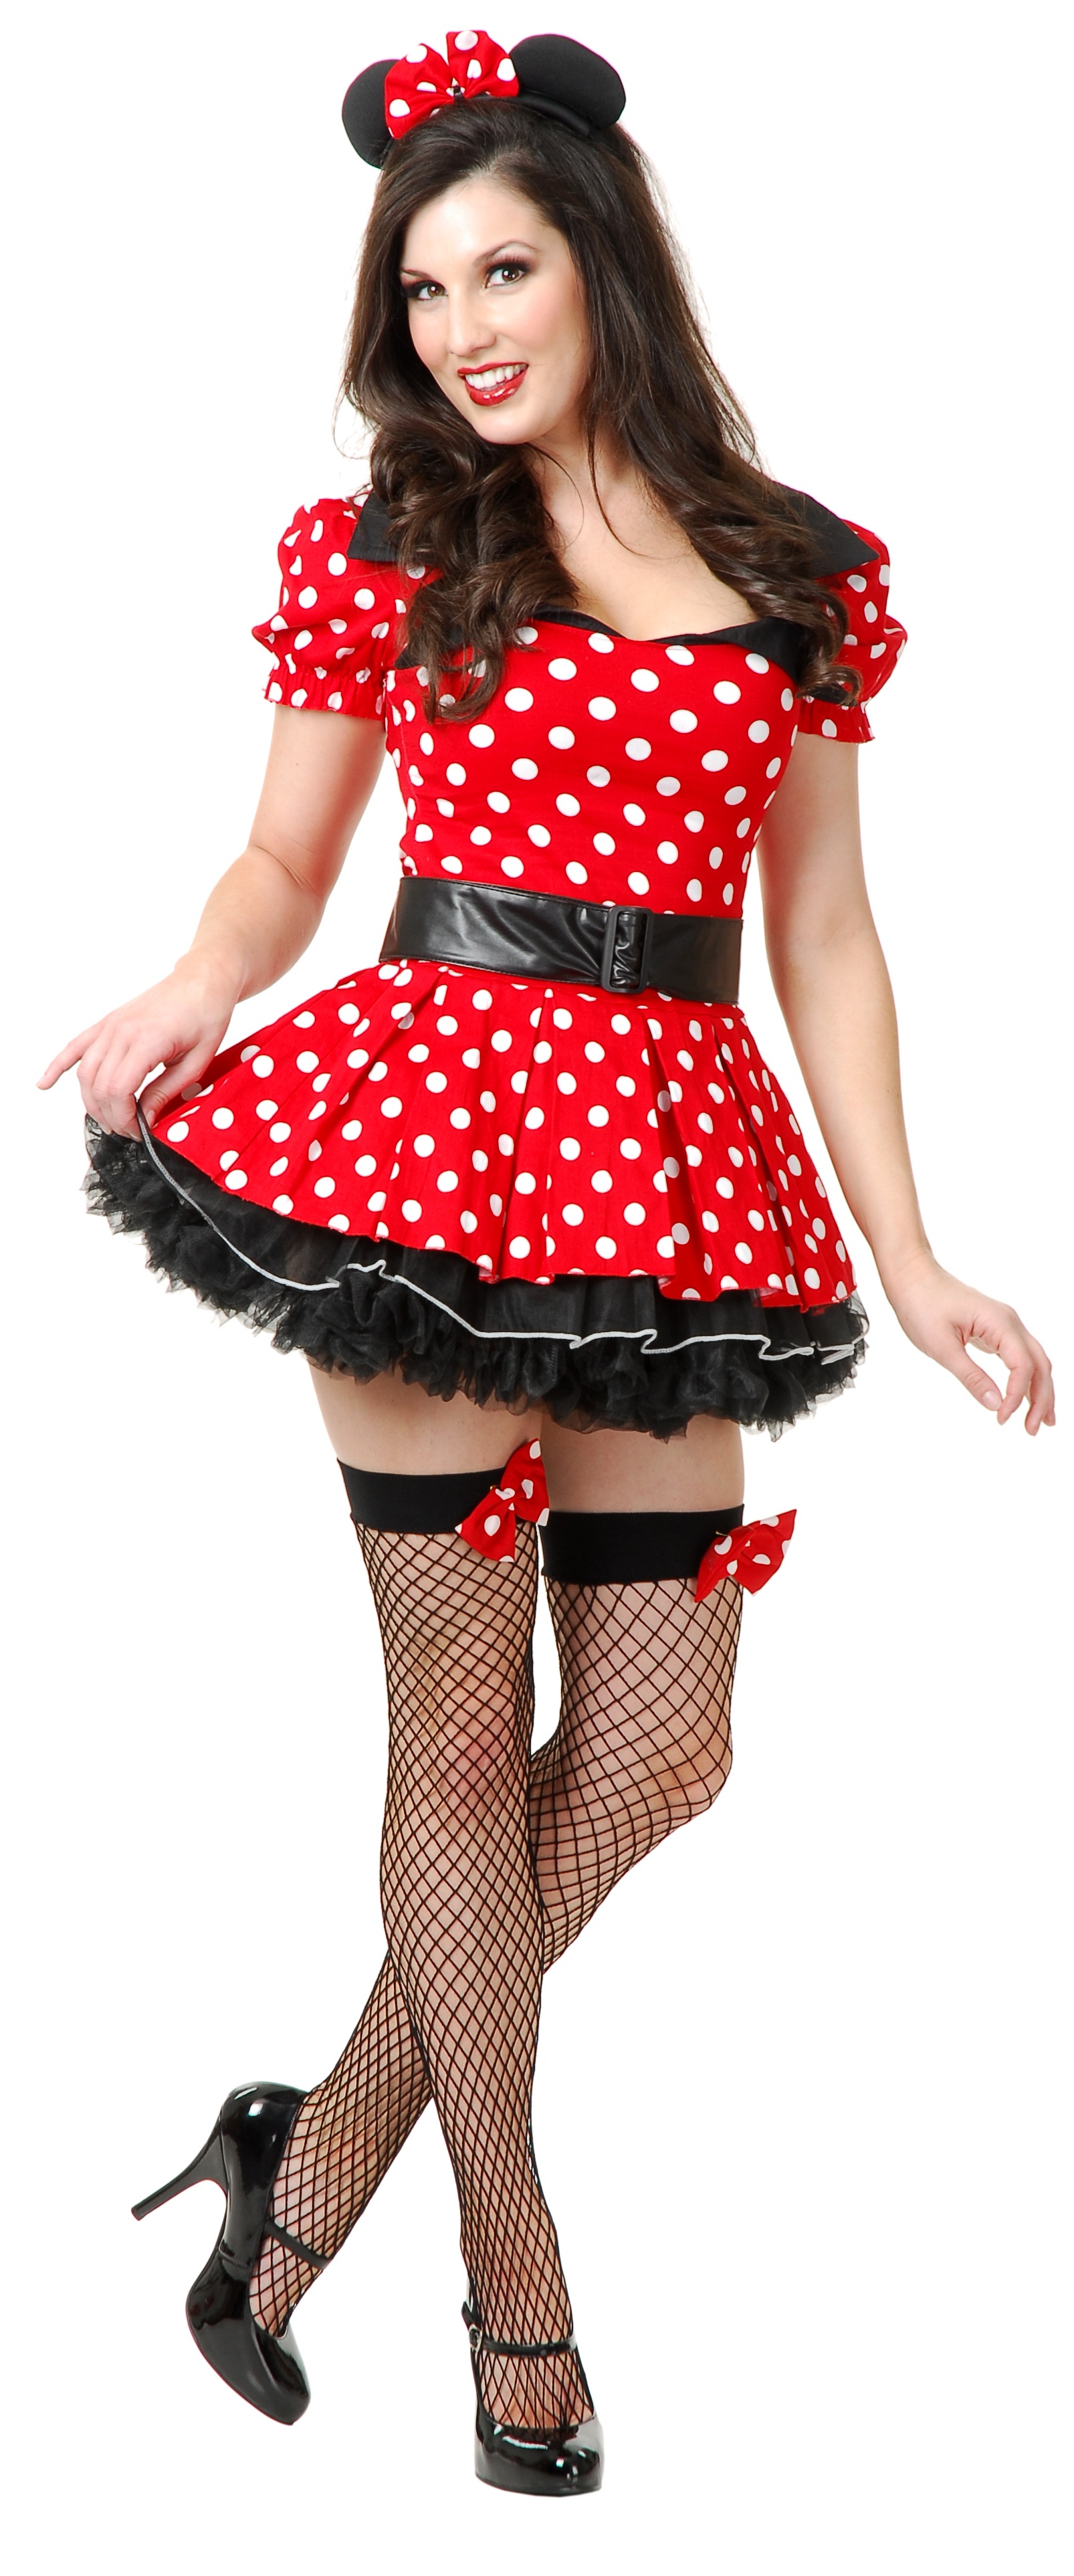 Minnie-Mouse-Pin-Up-Costume-02374.jpg